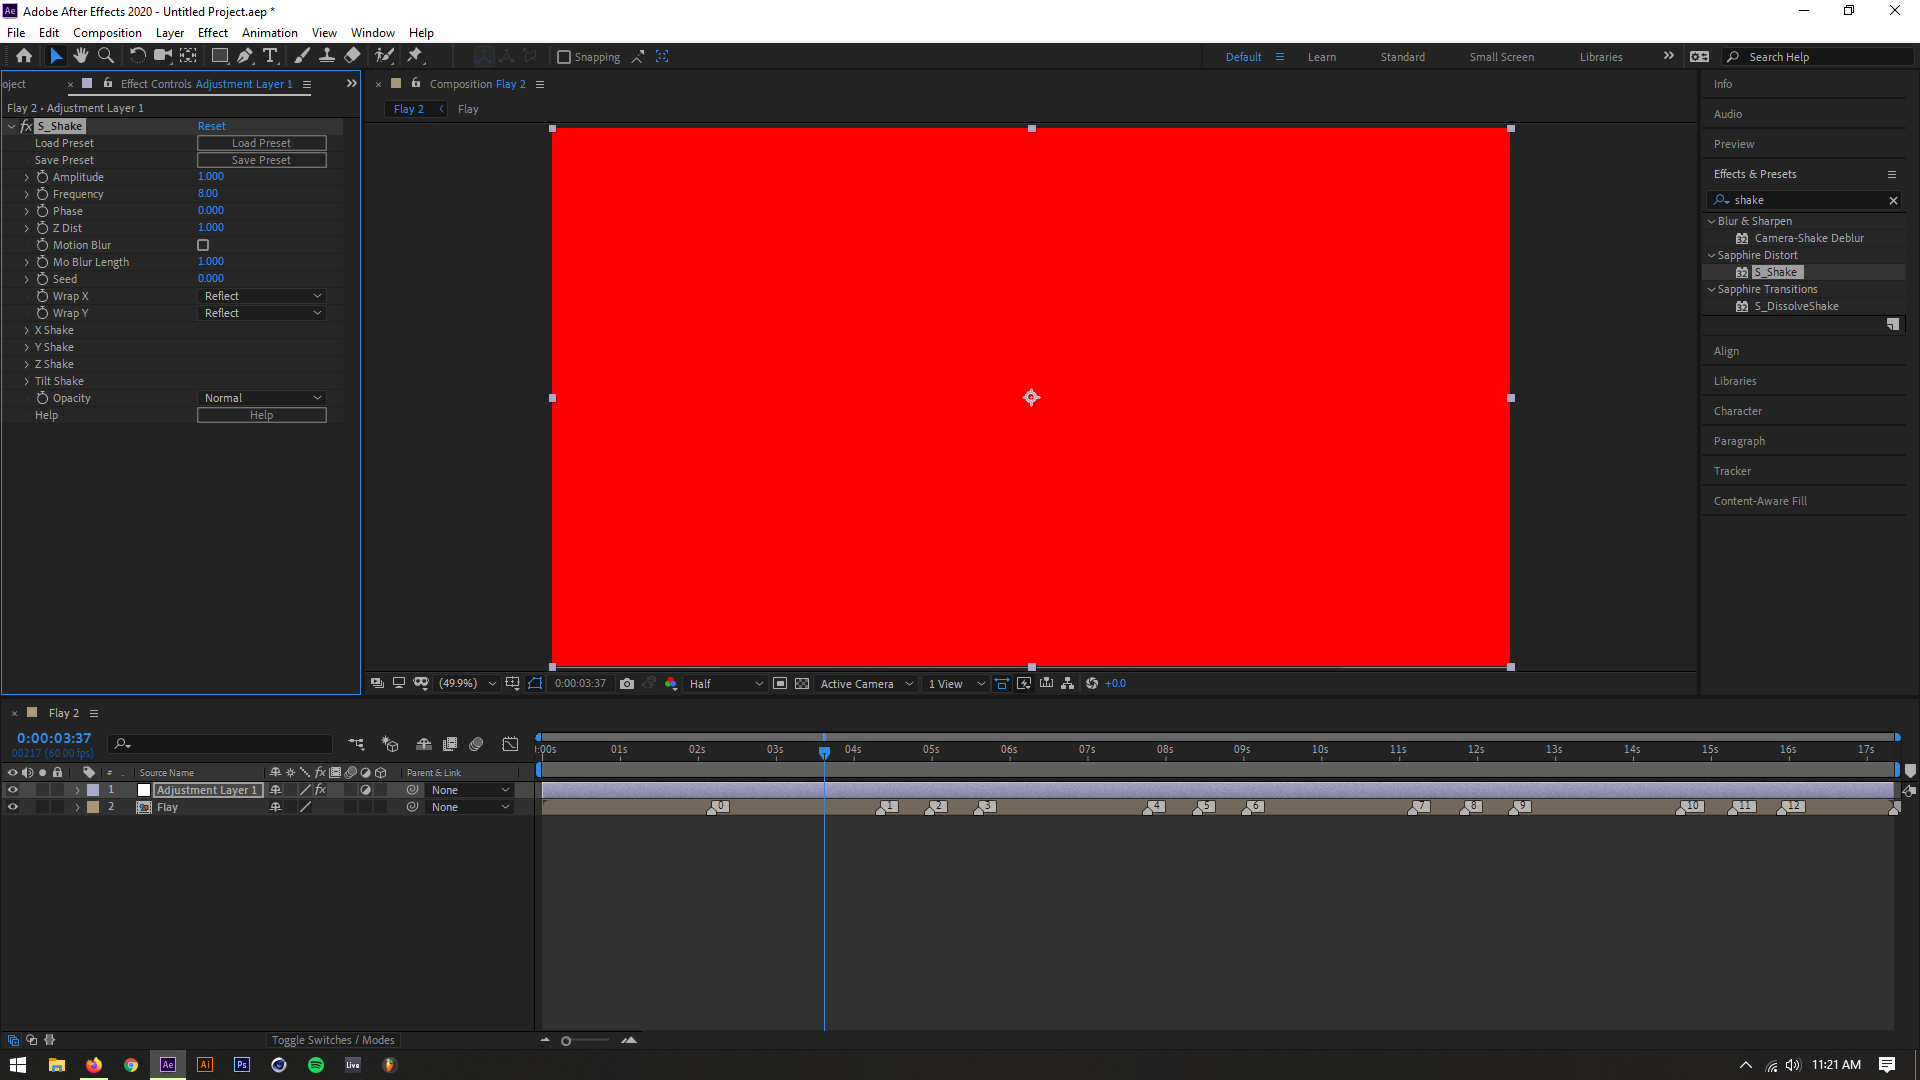 Red Screen when any effects that are not ... - Adobe Support Community - 11118029